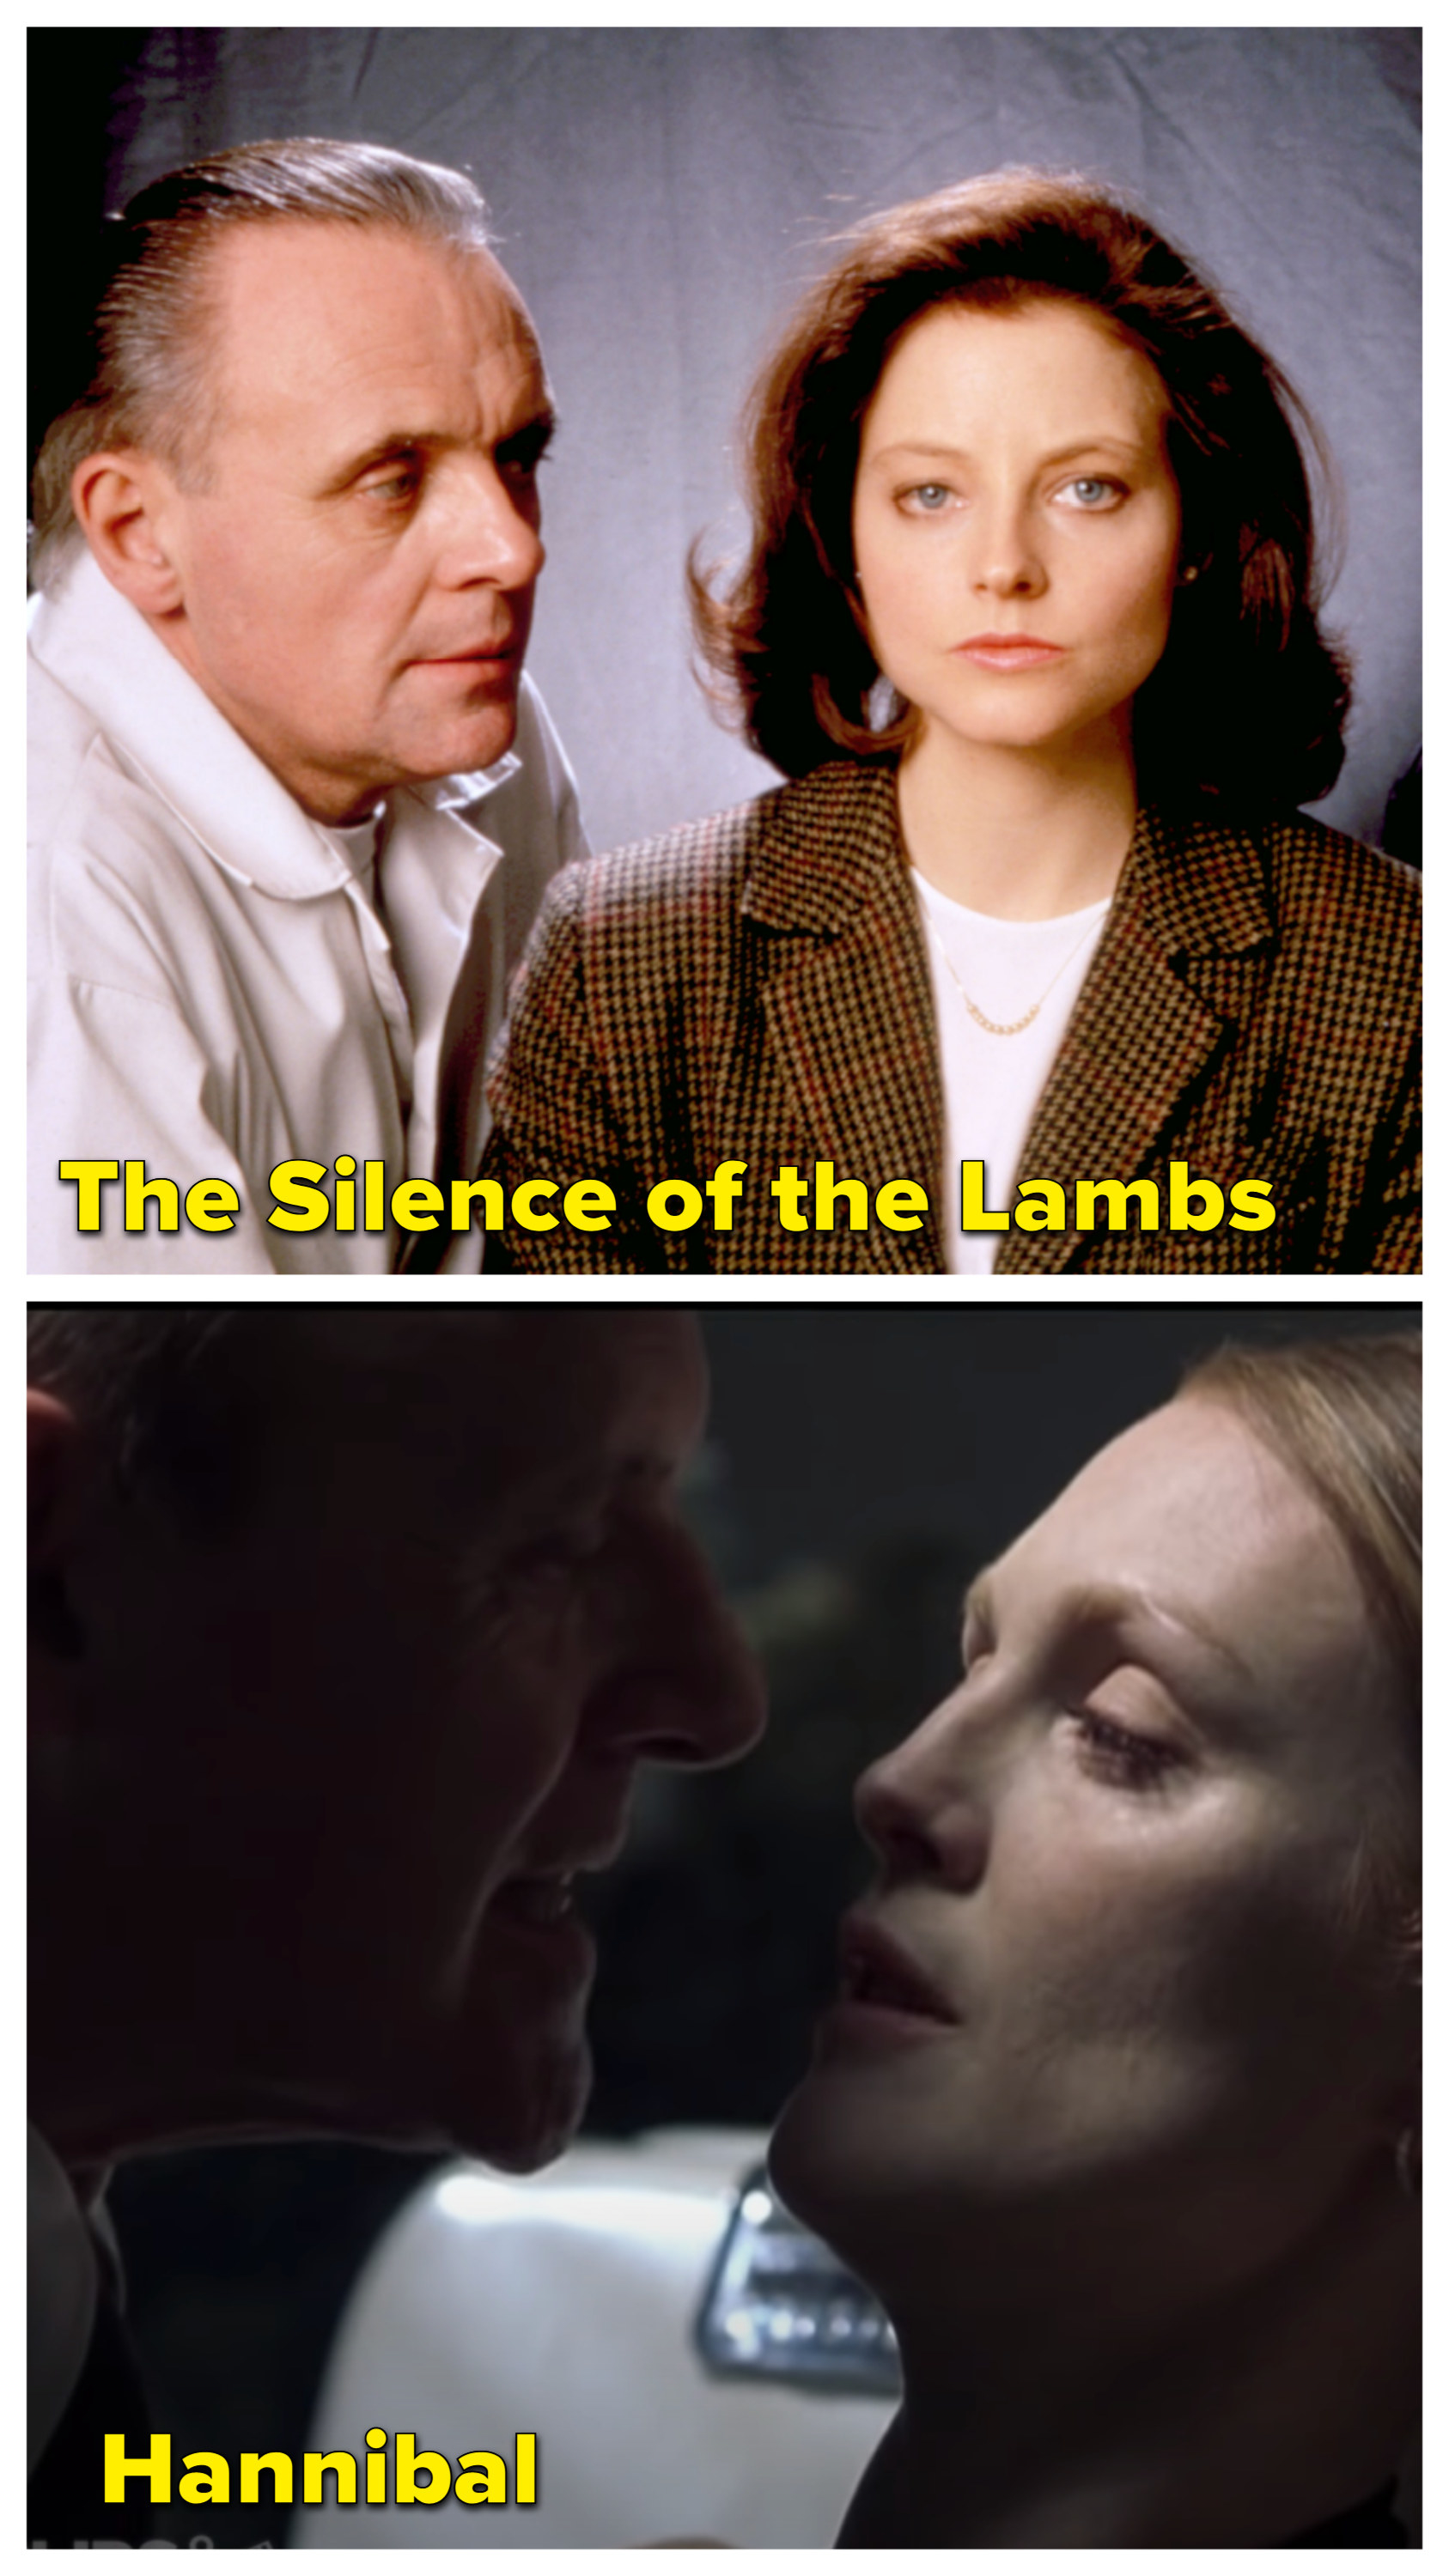 Foster and Hopkins in Silence of the lambs and Moore and Hopkins in Hannibal